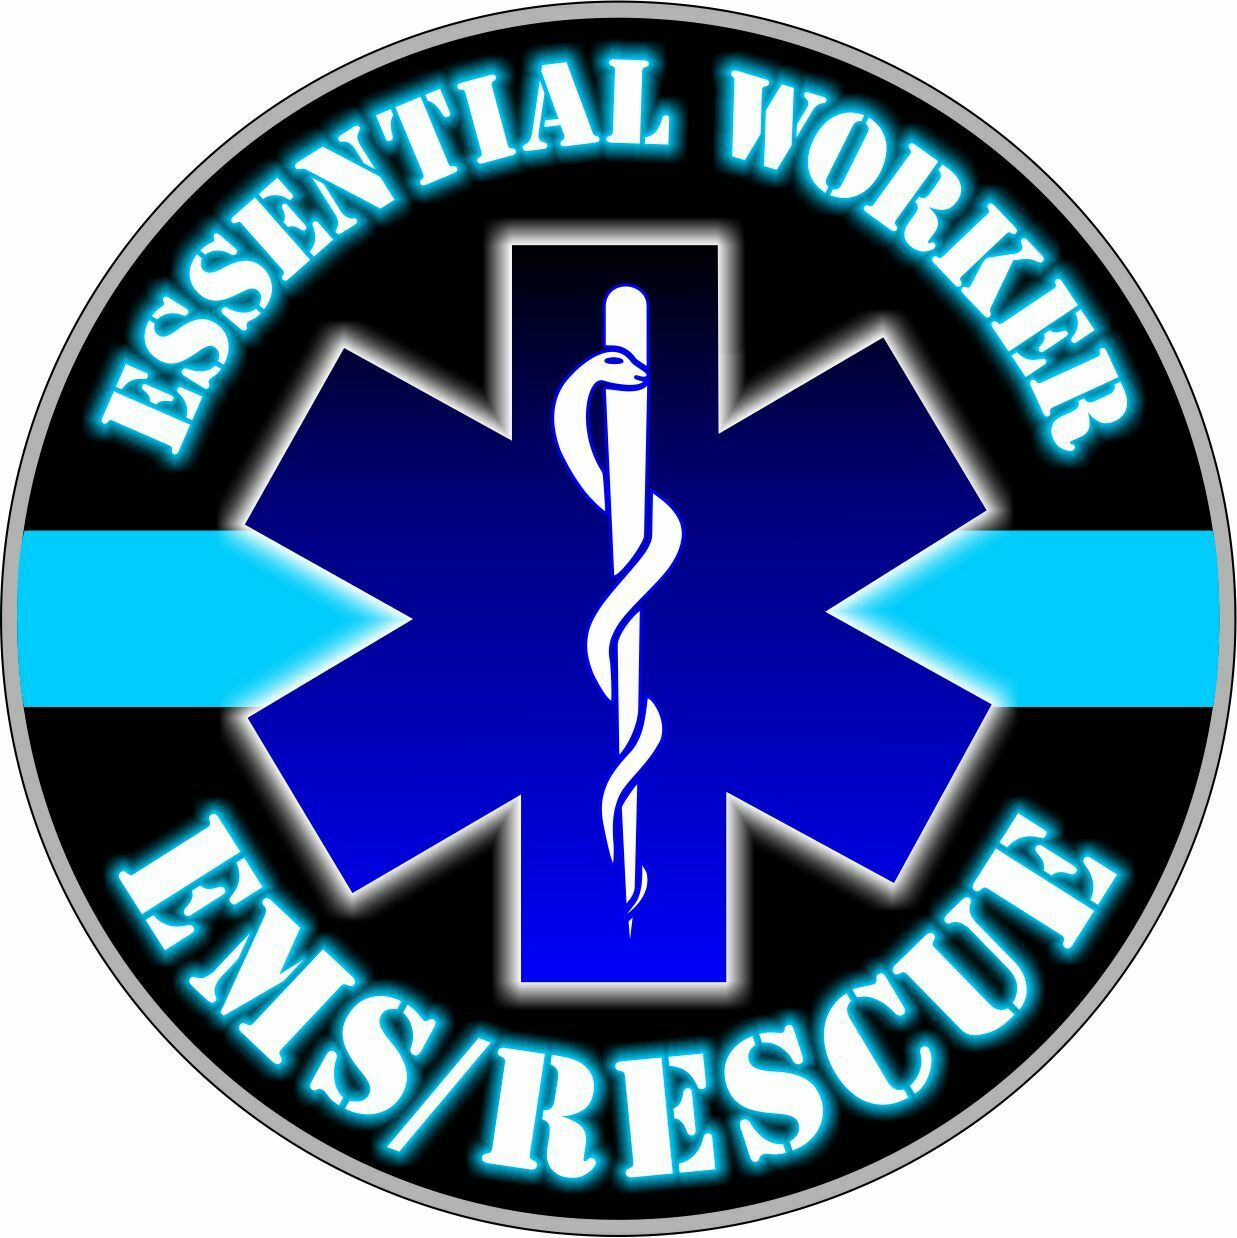 Essential Worker Decal - Police Officer Hardhat/Window Sticker - Various sizes - Powercall Sirens LLC